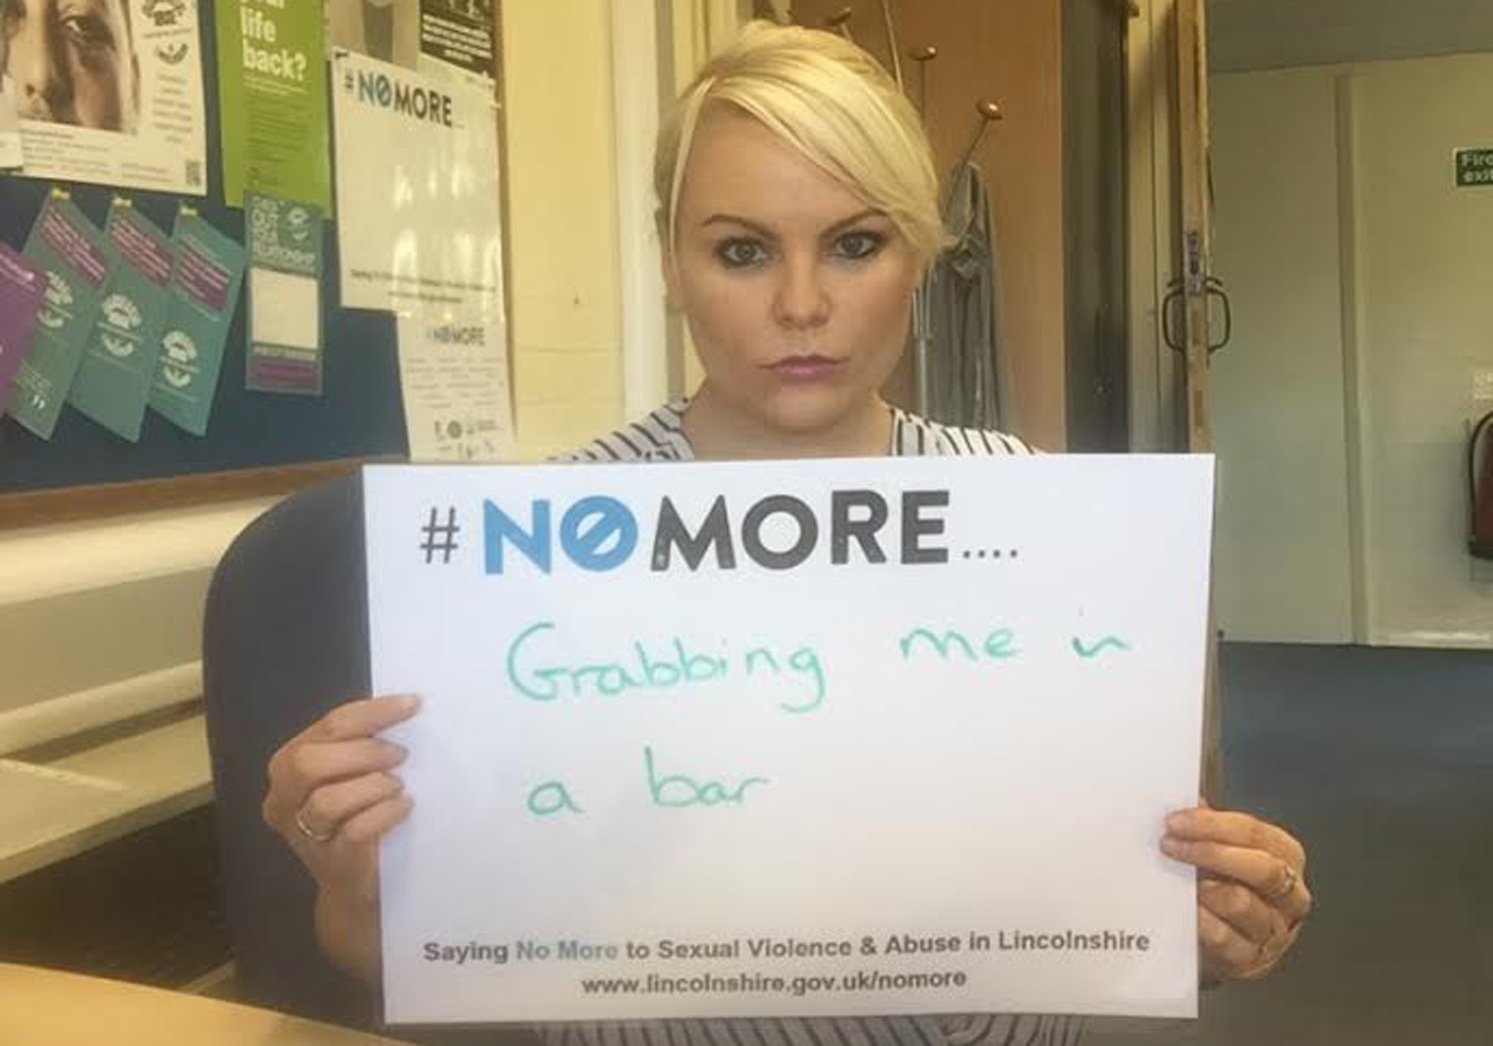 Anyone can take part by tweeting a picture of themselves holding a #NoMore slogan board supporting the aims of the campaign.